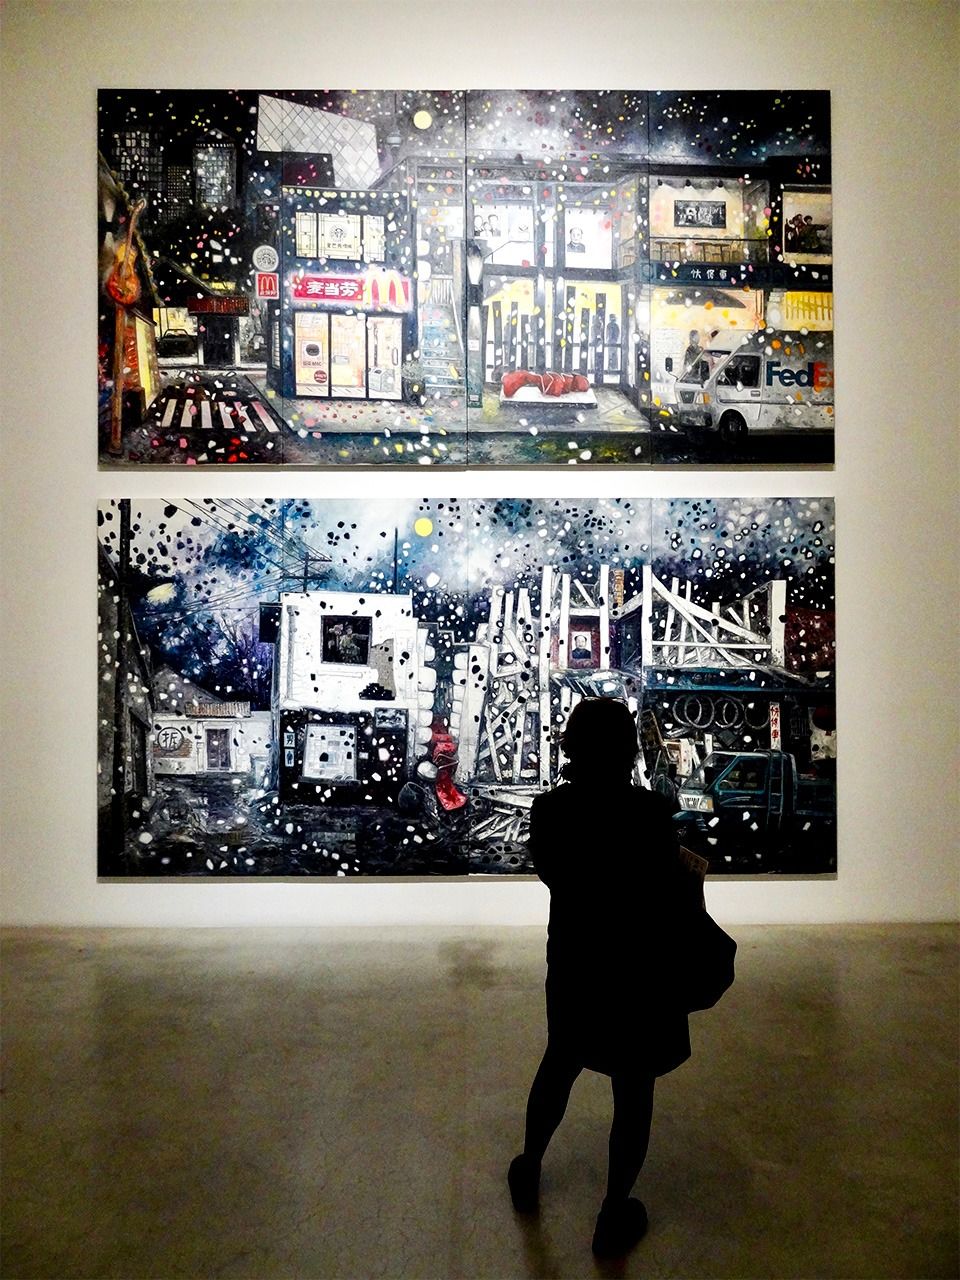 <em>City from the Past and City from the Future, 2008</em>. On display at the 21st Century Museum of Contemporary Art, Kanazawa. (© Tim Hornyak)